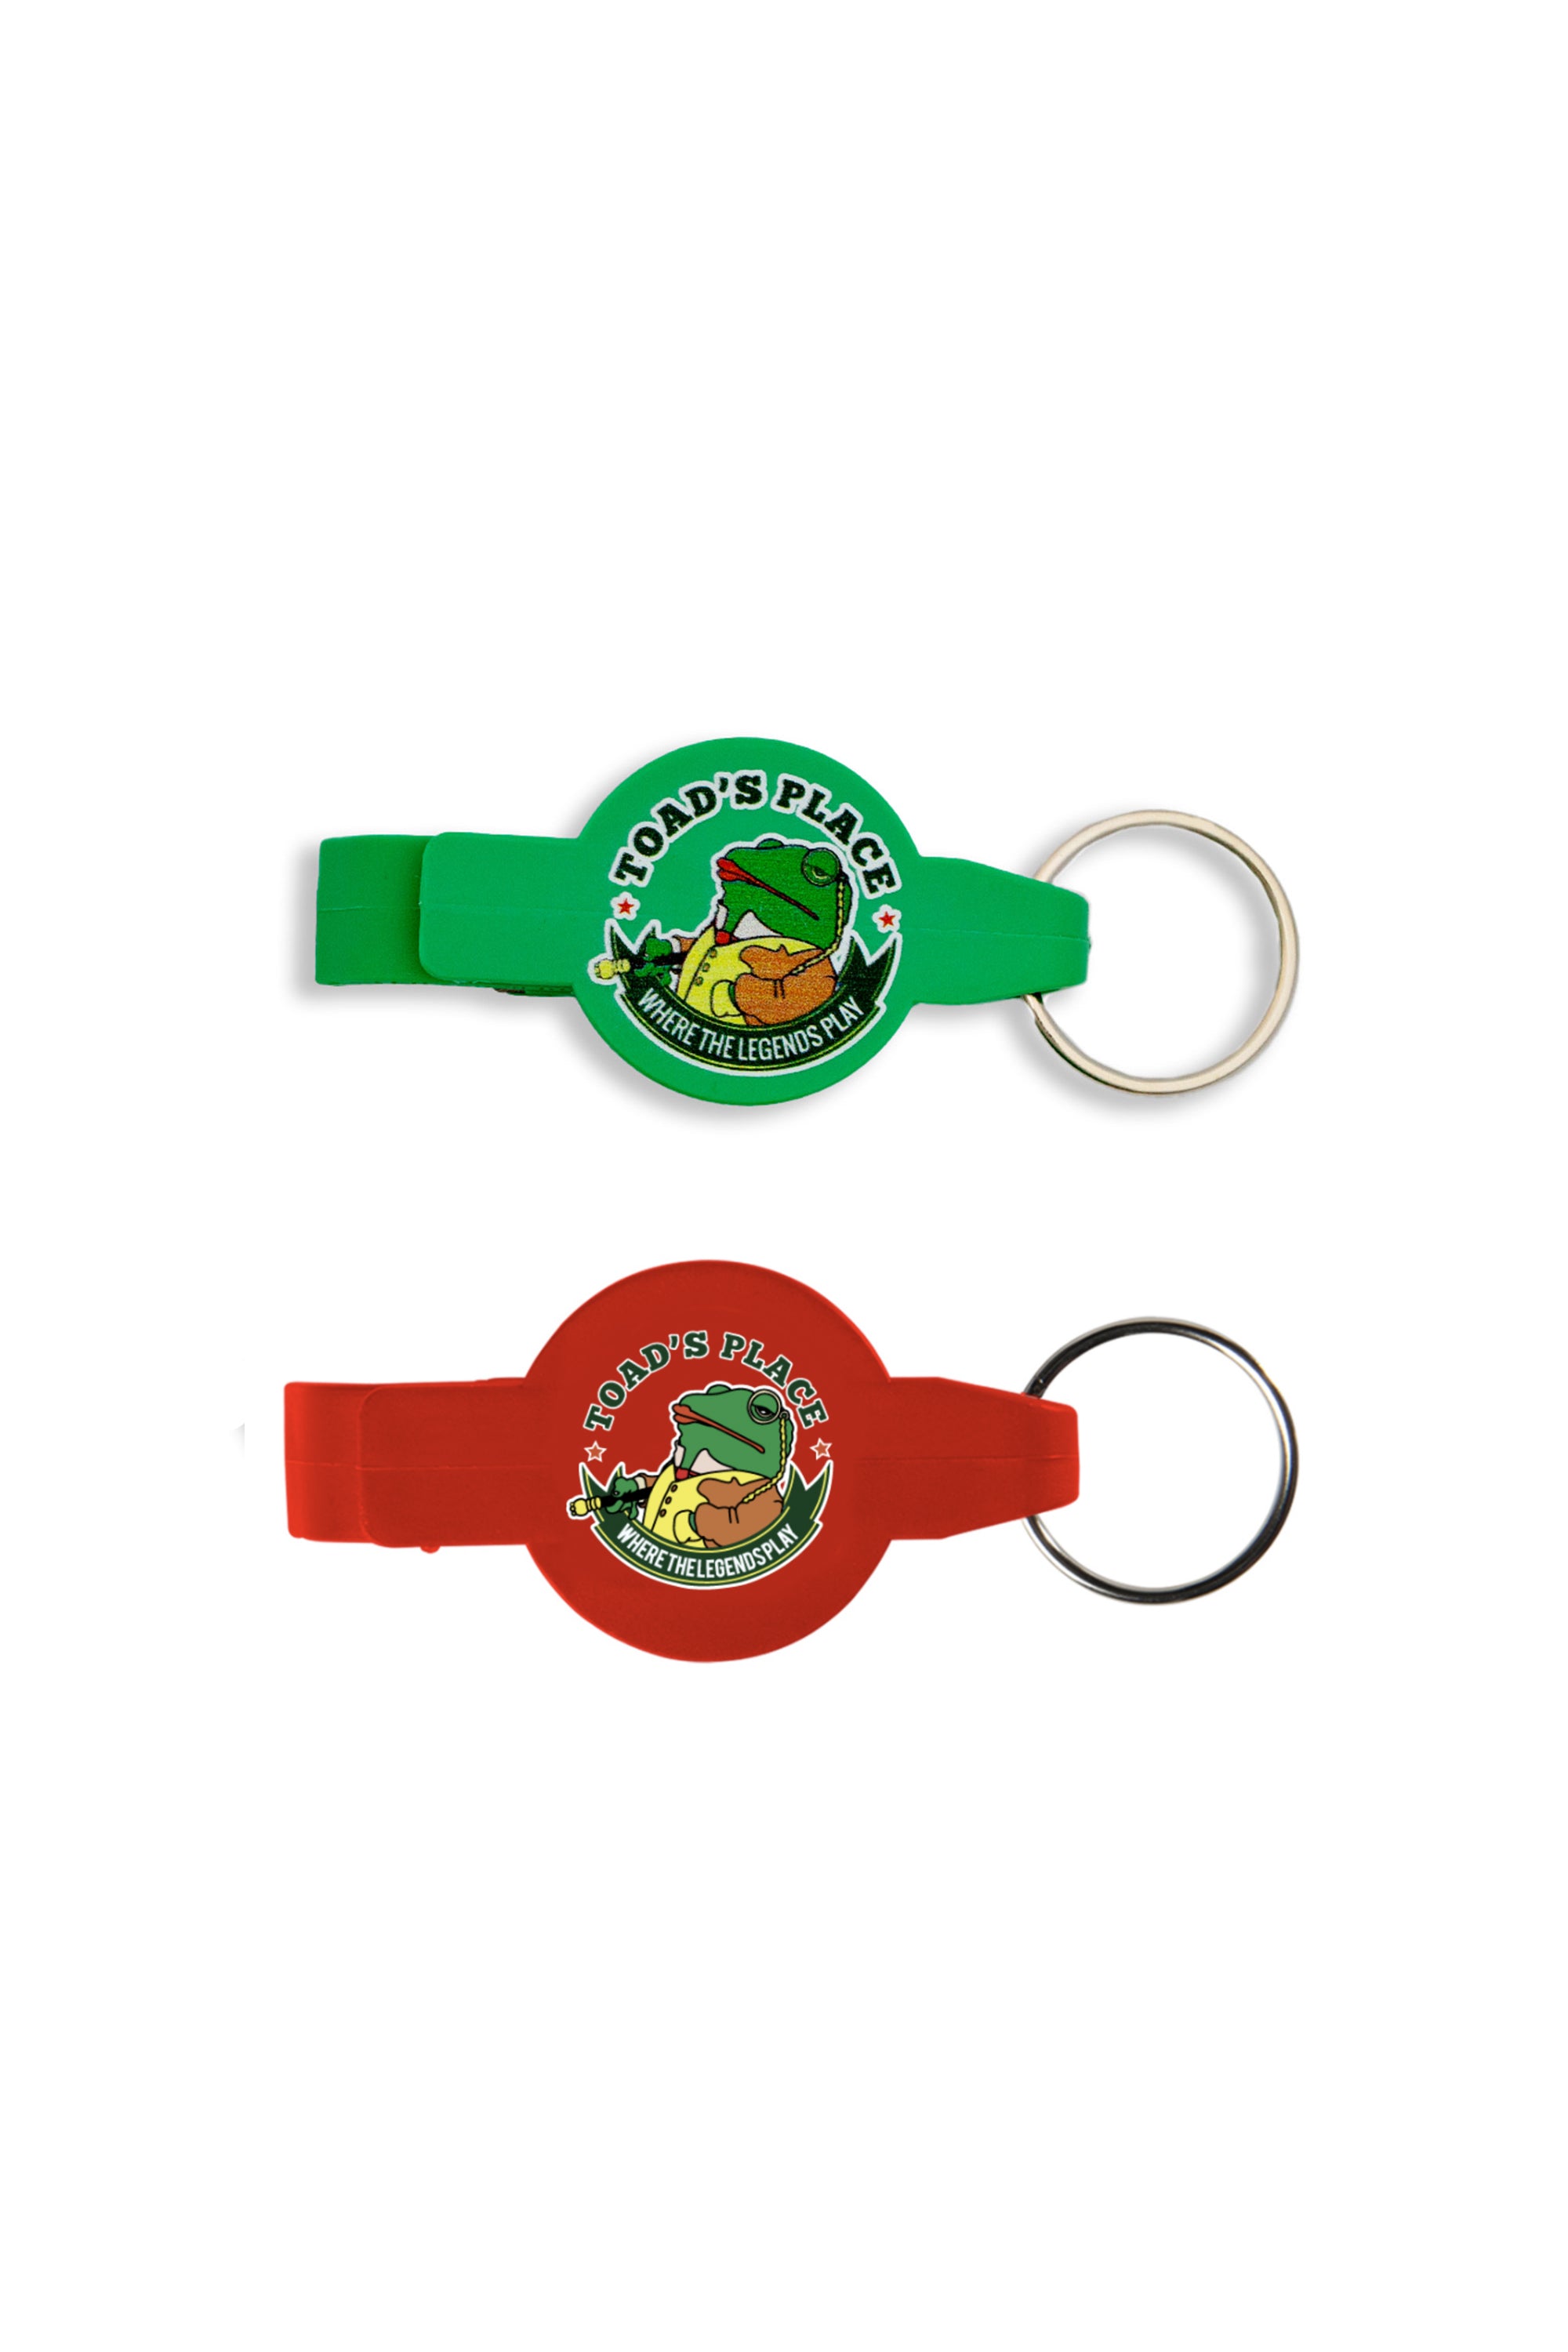 Toad's Place Keychain Bottle Opener